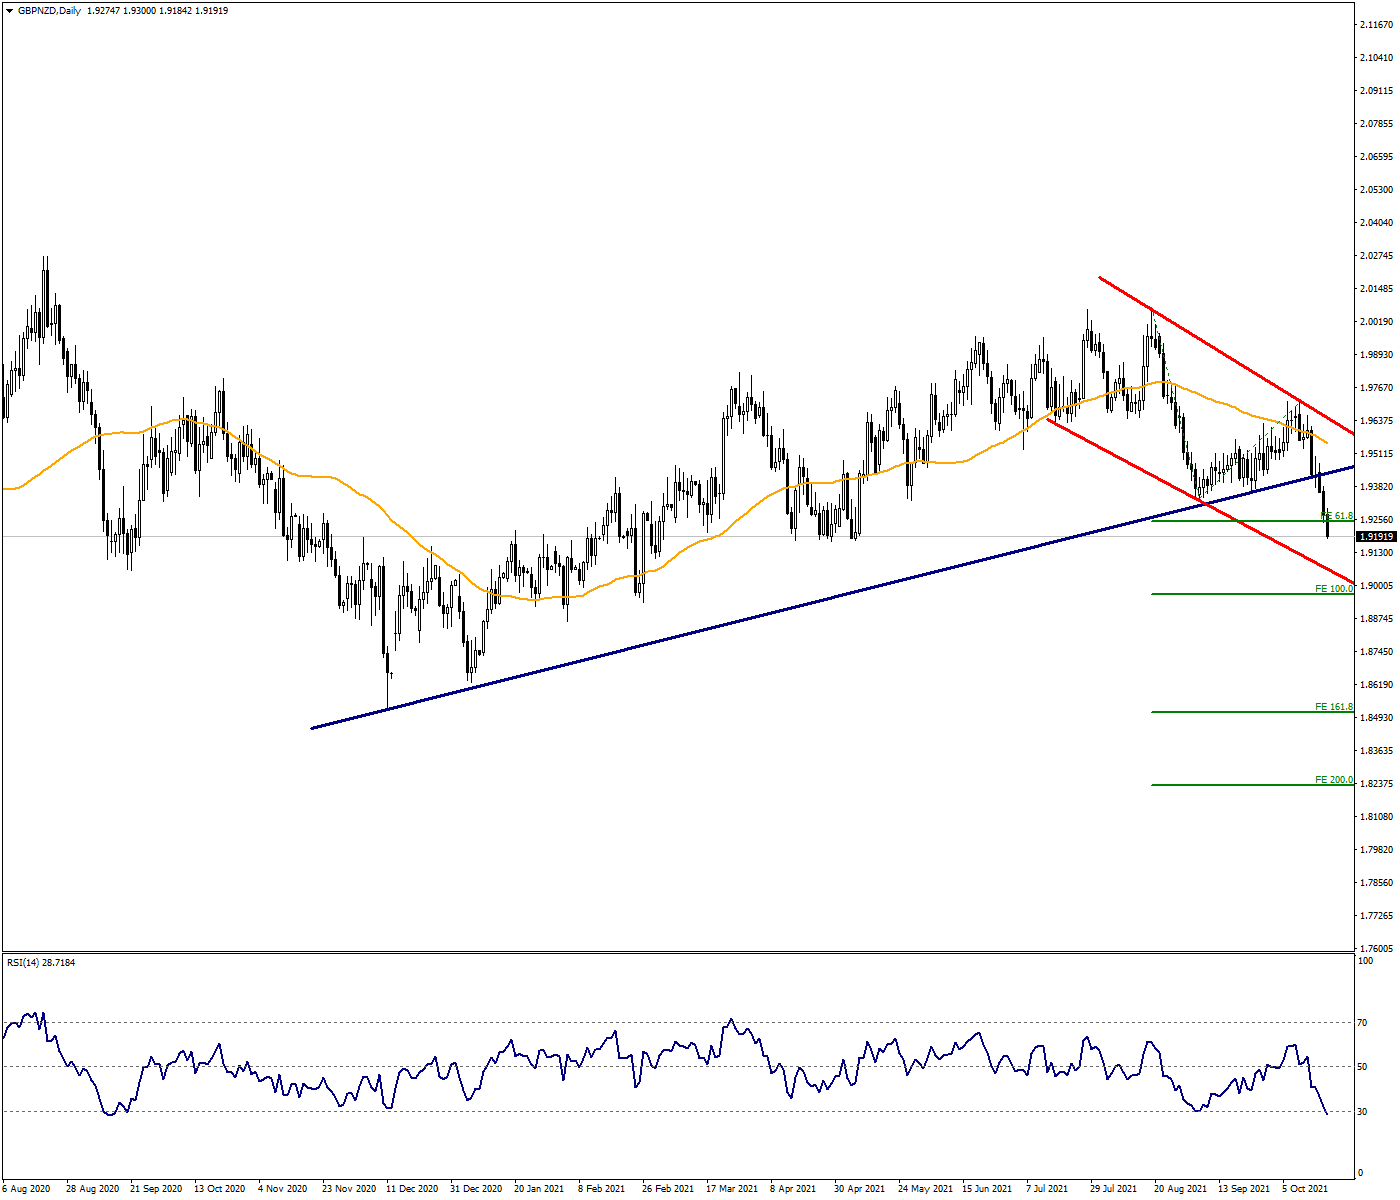 Ascending Trend Ended in GBPNZD